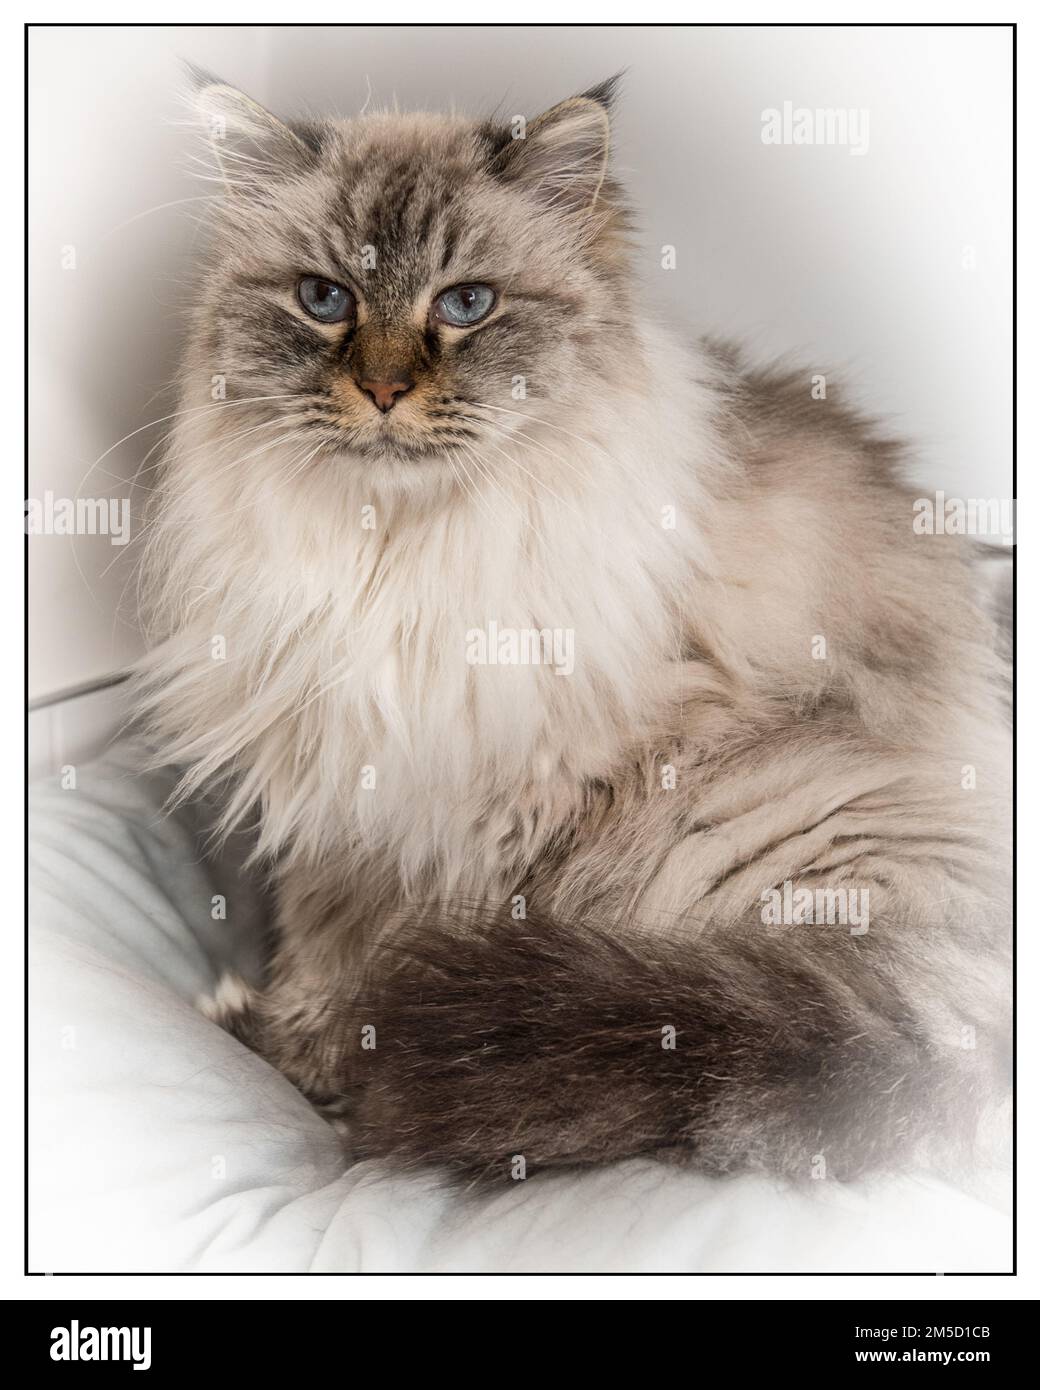 Siberian pure bred pedigree cat with long fur, large eyes and pretty face. Stock Photo